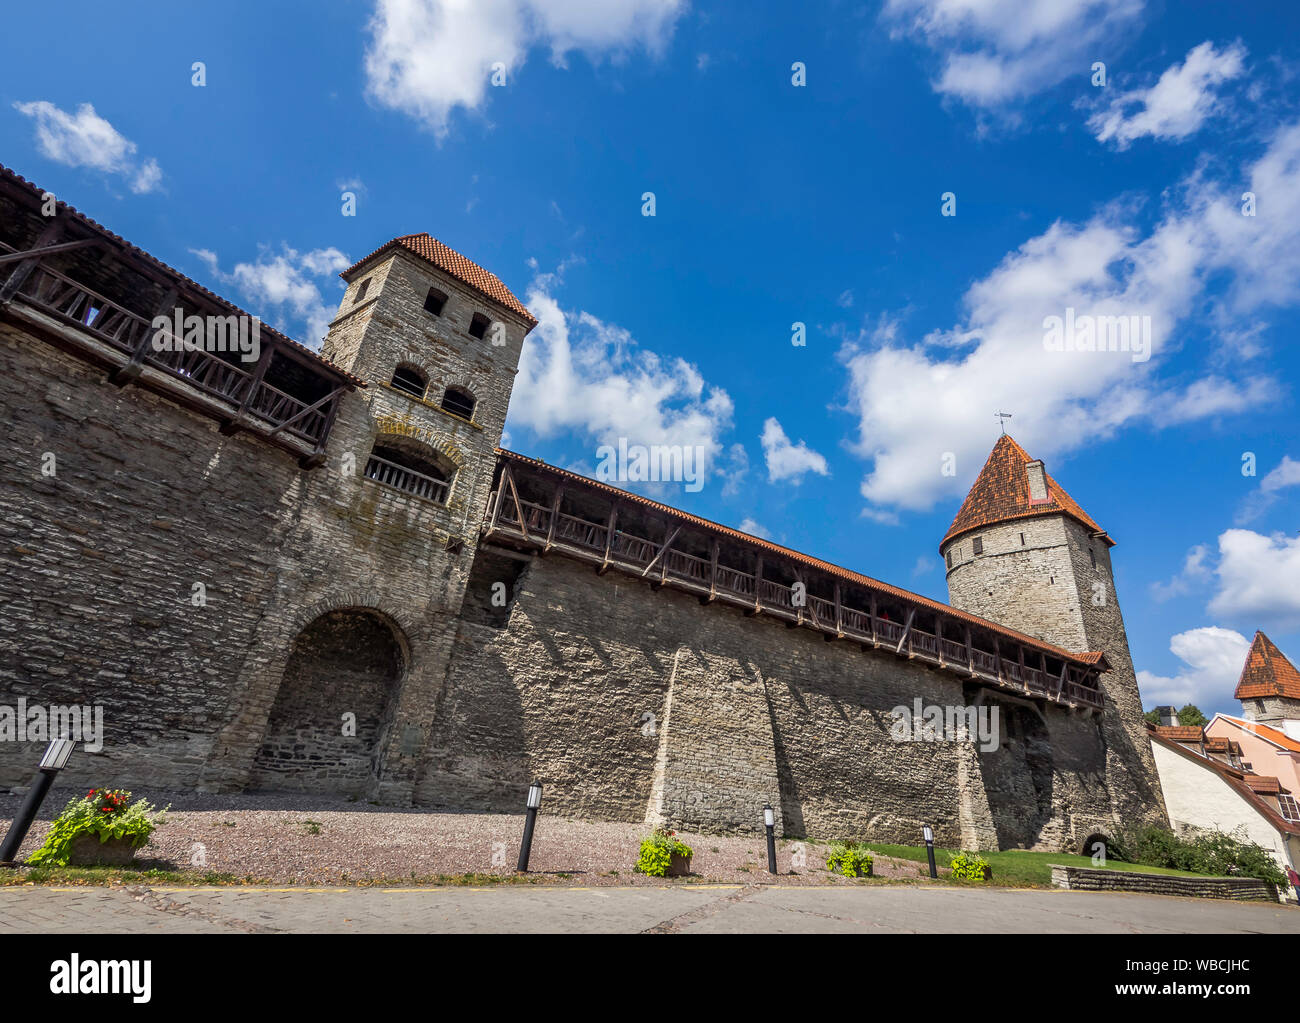 Beautiful Lower Town Wall and its towers in Tallinn old town, Estonia Stock Photo